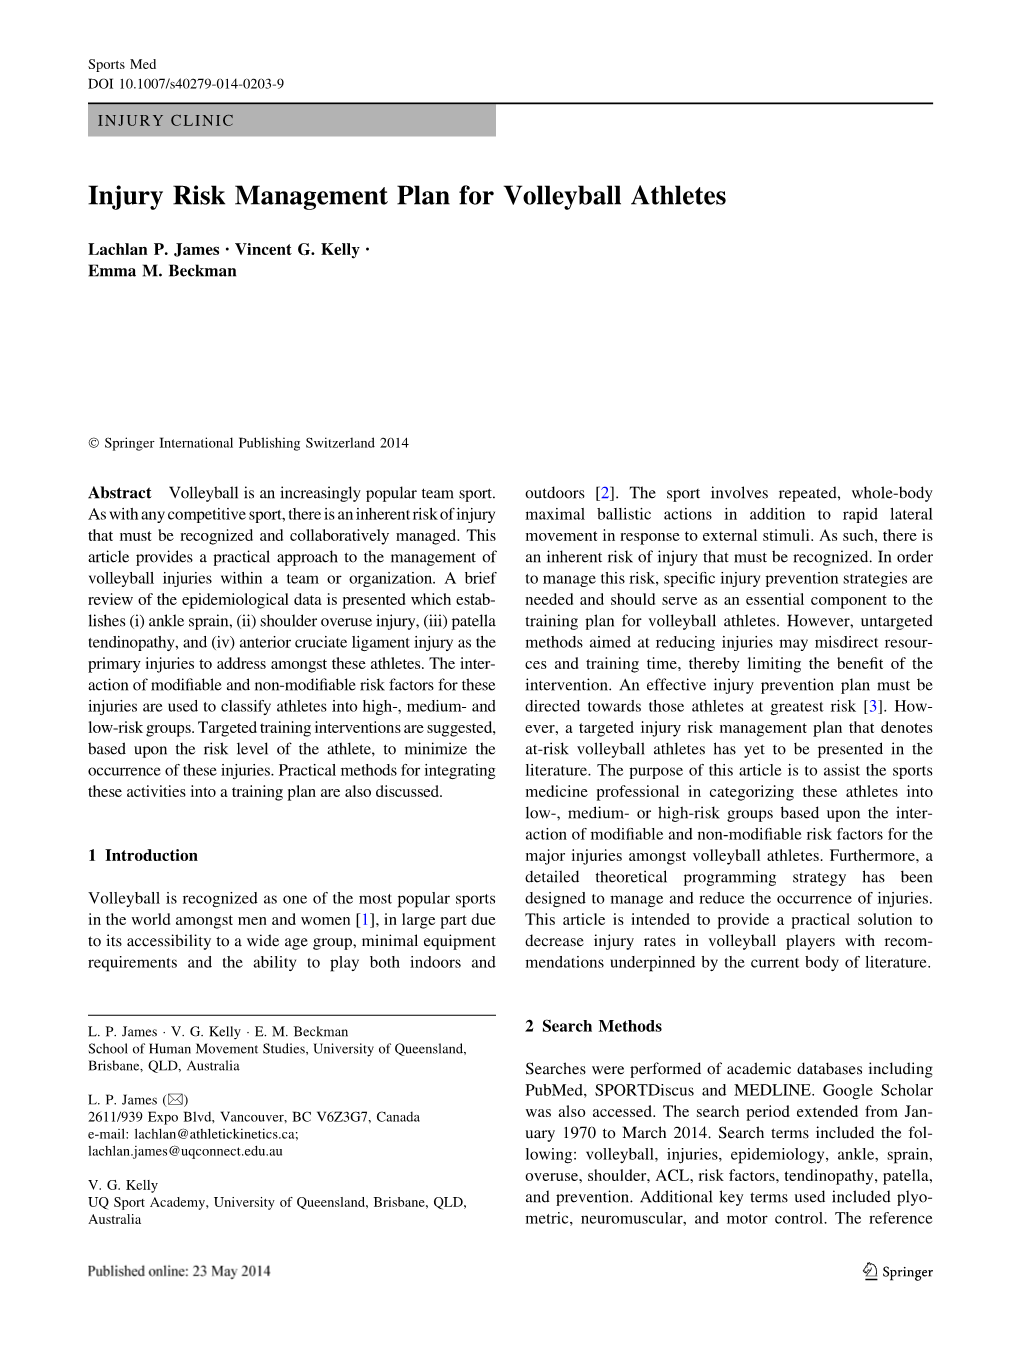 Injury Risk Management Plan for Volleyball Athletes